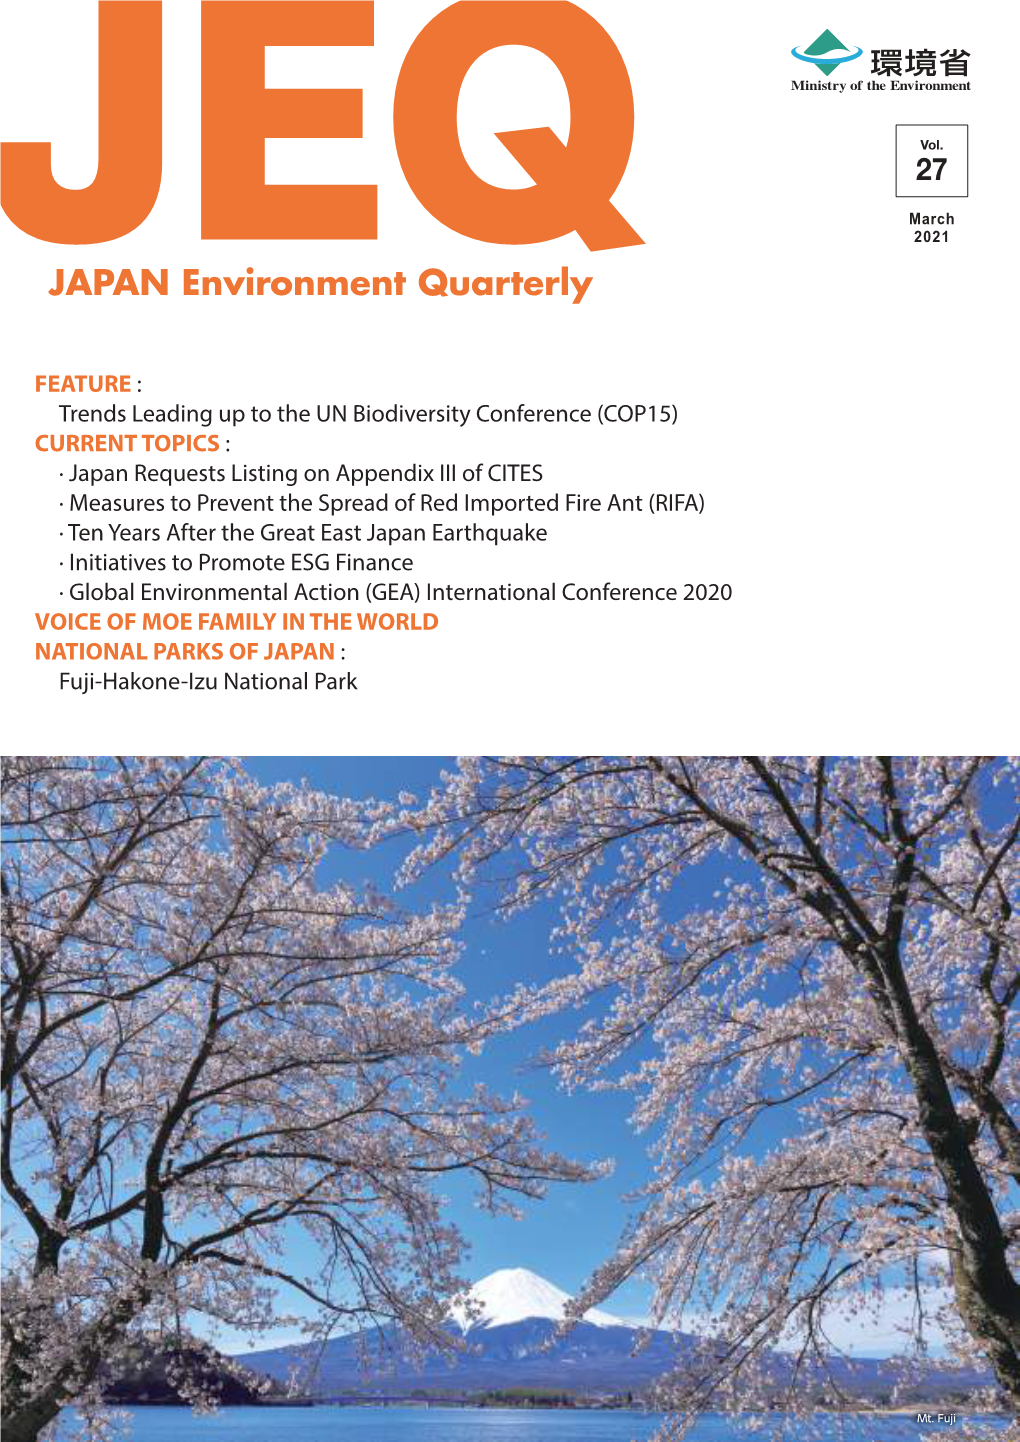 FEATURE : Trends Leading up to the UN Biodiversity Conference (COP15) CURRENT TOPICS : · Japan Requests Listing on Appendix